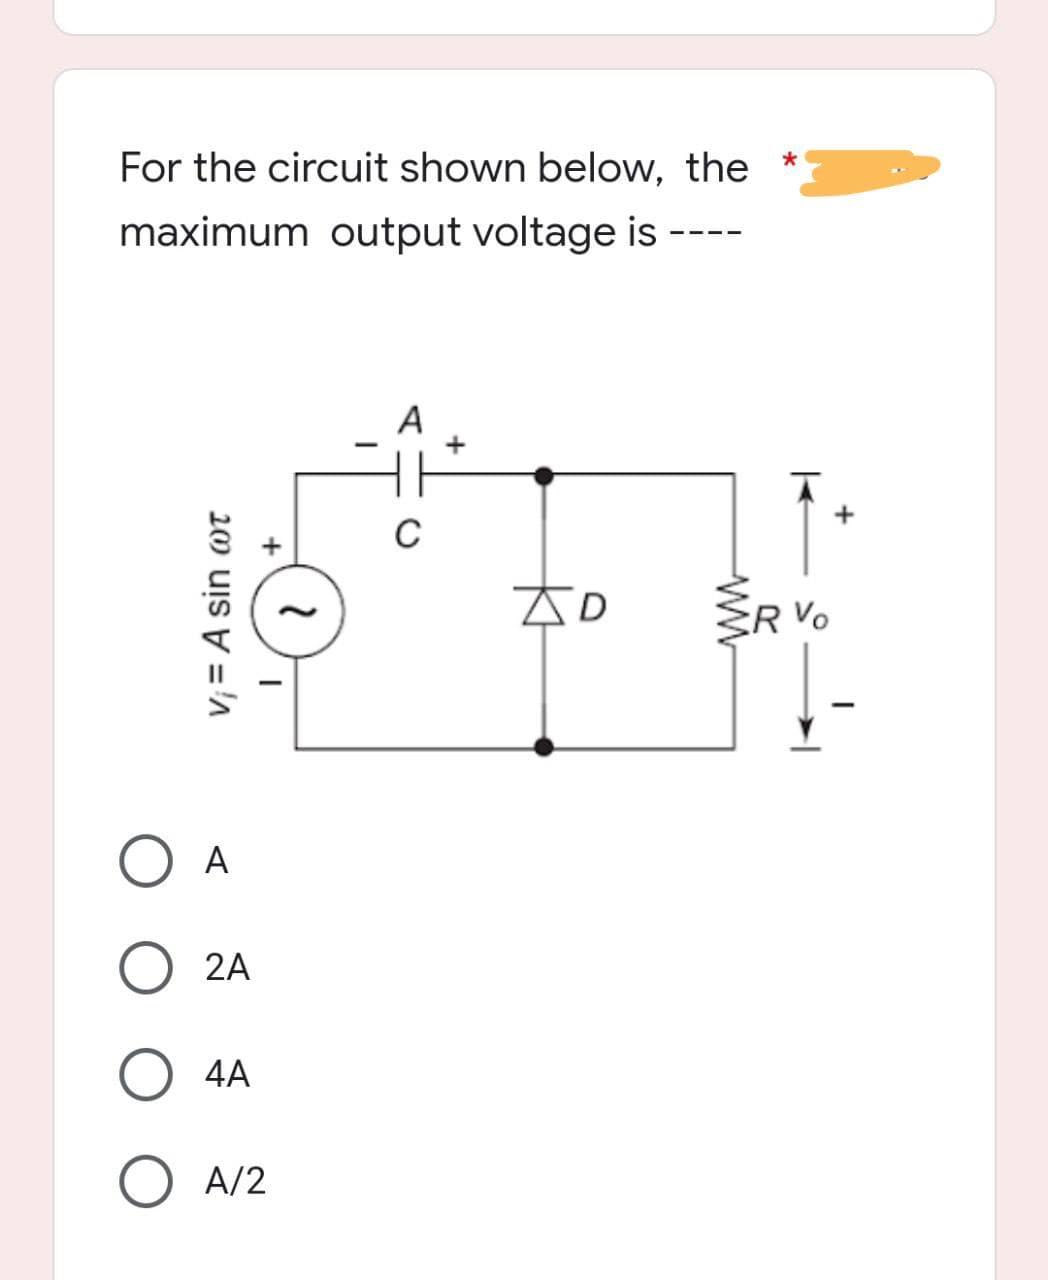 For the circuit shown below, the
maximum output voltage is
A
C
v₁ = A sin wot
A
2A
O 4A
O A/2
+
AD
ww
ER V
+
-